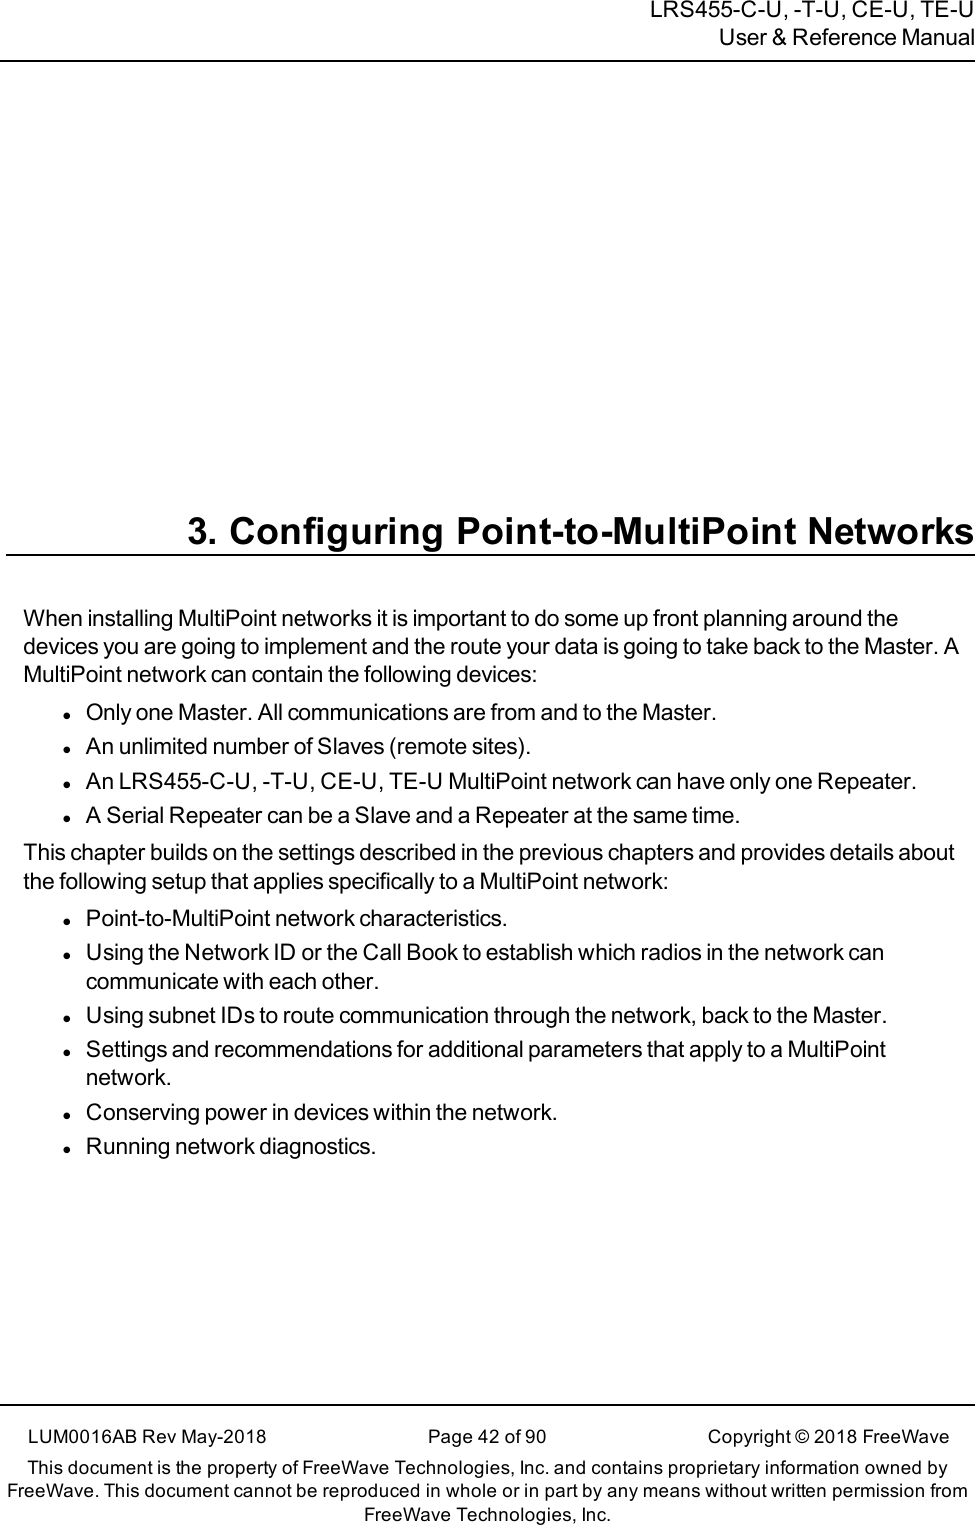 LRS455-C-U, -T-U, CE-U, TE-UUser &amp; Reference Manual3. Configuring Point-to-MultiPoint NetworksWhen installing MultiPoint networks it is important to do some up front planning around thedevices you are going to implement and the route your data is going to take back to the Master. AMultiPoint network can contain the following devices:lOnly one Master. All communications are from and to the Master.lAn unlimited number of Slaves (remote sites).lAn LRS455-C-U, -T-U, CE-U, TE-U MultiPoint network can have only one Repeater.lA Serial Repeater can be a Slave and a Repeater at the same time.This chapter builds on the settings described in the previous chapters and provides details aboutthe following setup that applies specifically to a MultiPoint network:lPoint-to-MultiPoint network characteristics.lUsing the Network ID or the Call Book to establish which radios in the network cancommunicate with each other.lUsing subnet IDs to route communication through the network, back to the Master.lSettings and recommendations for additional parameters that apply to a MultiPointnetwork.lConserving power in devices within the network.lRunning network diagnostics.LUM0016AB Rev May-2018 Page 42 of 90 Copyright © 2018FreeWaveThis document is the property of FreeWave Technologies, Inc. and contains proprietary information owned byFreeWave. This document cannot be reproduced in whole or in part by any means without written permission fromFreeWave Technologies, Inc.